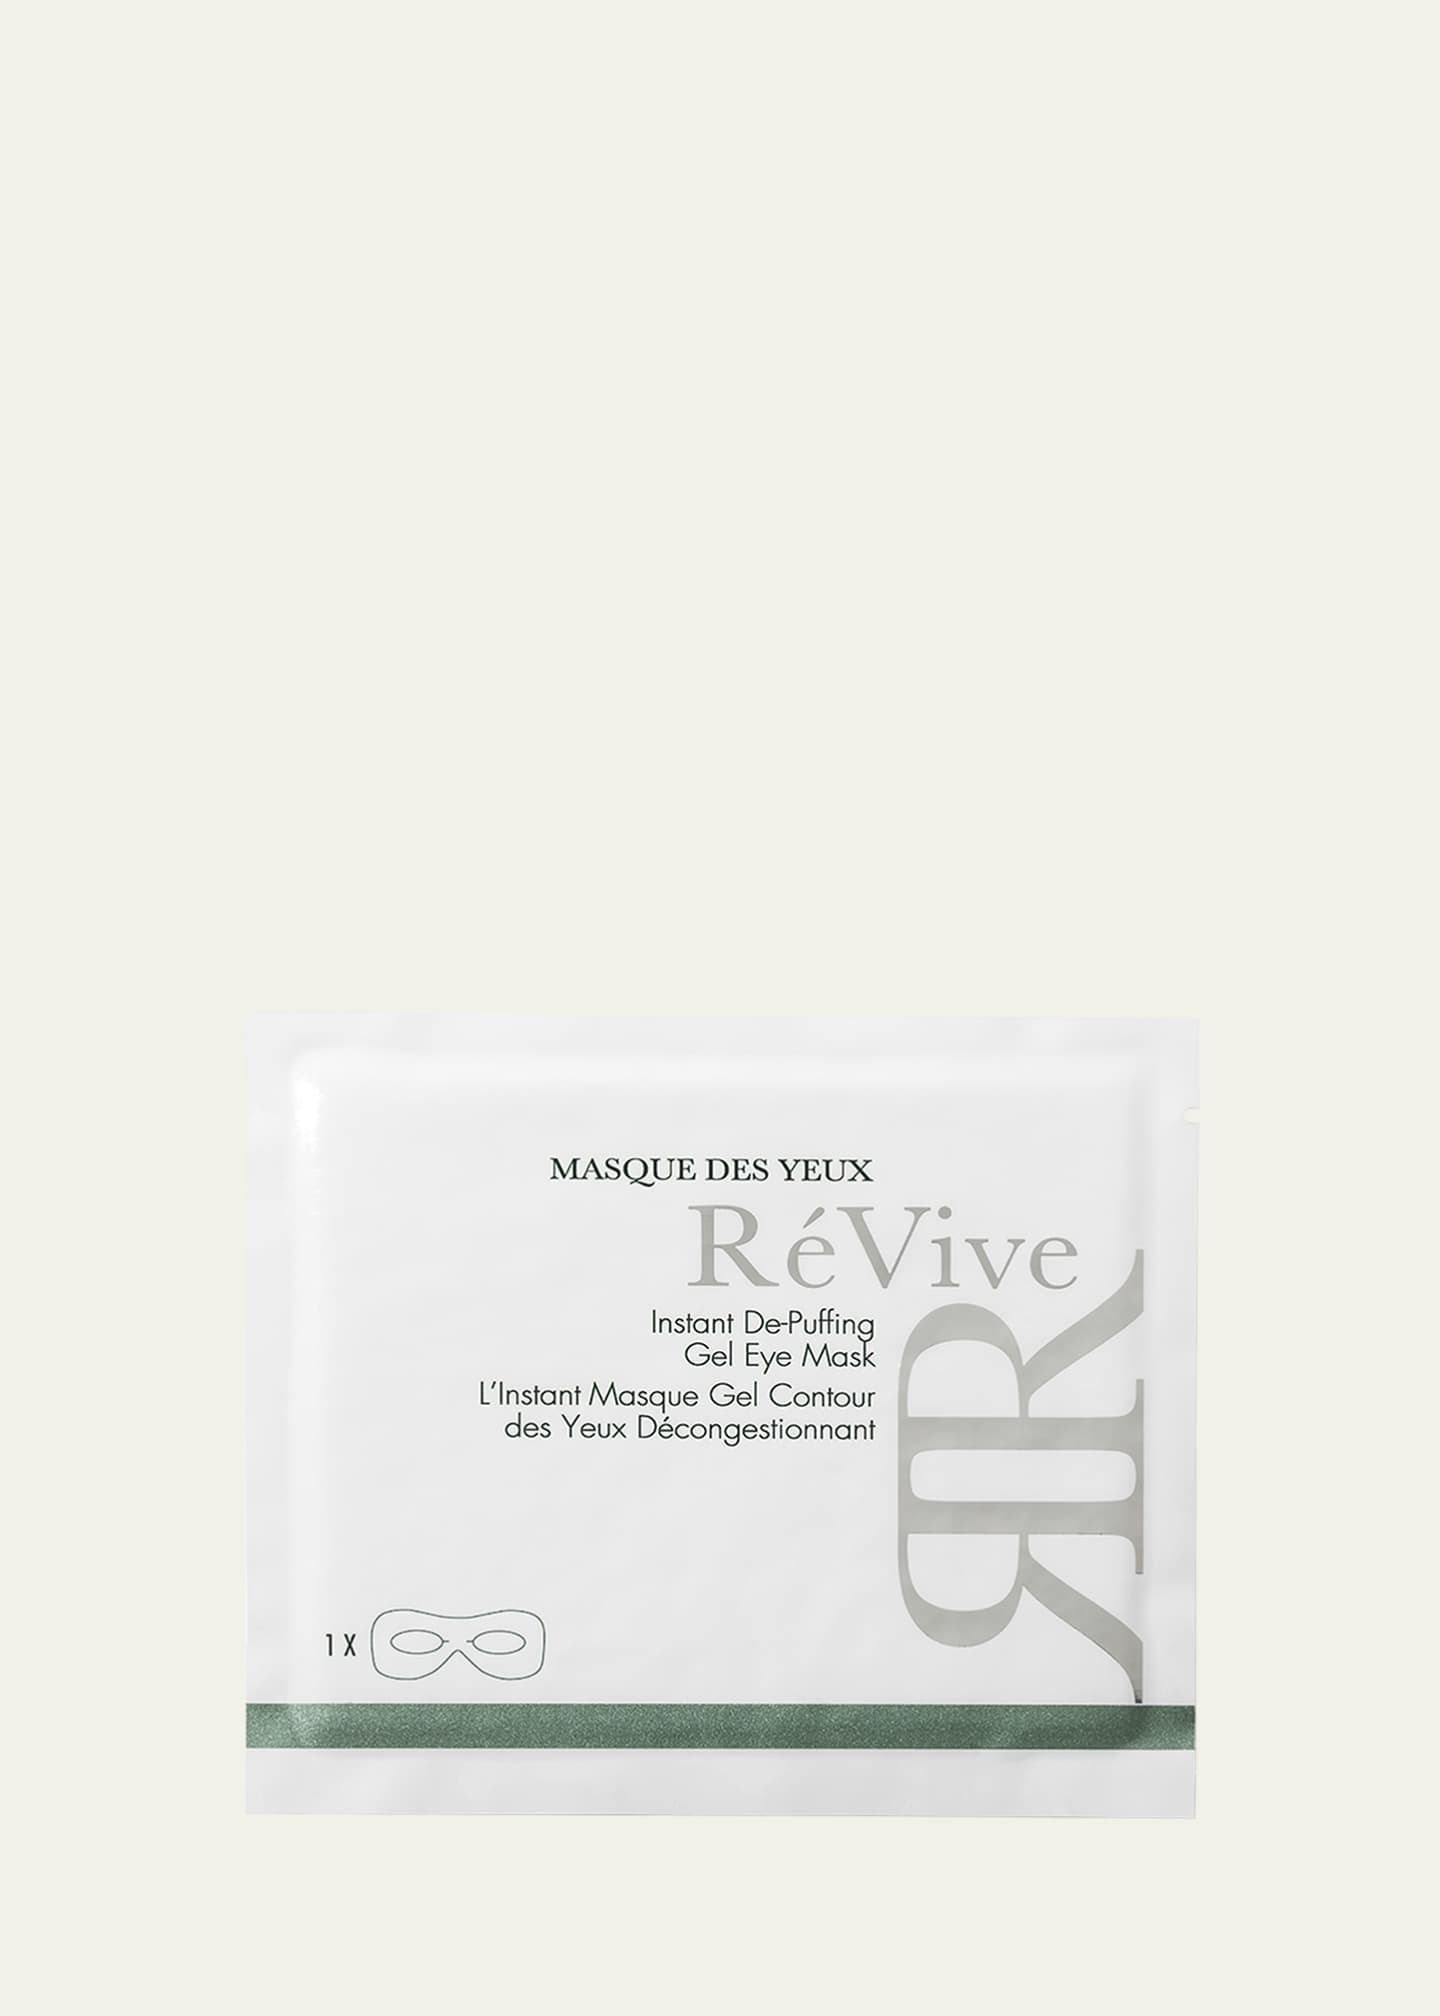 ReVive Masque Des Yeaux Instant De-Puffing Gel Eye Mask, 6 Pack Image 3 of 5